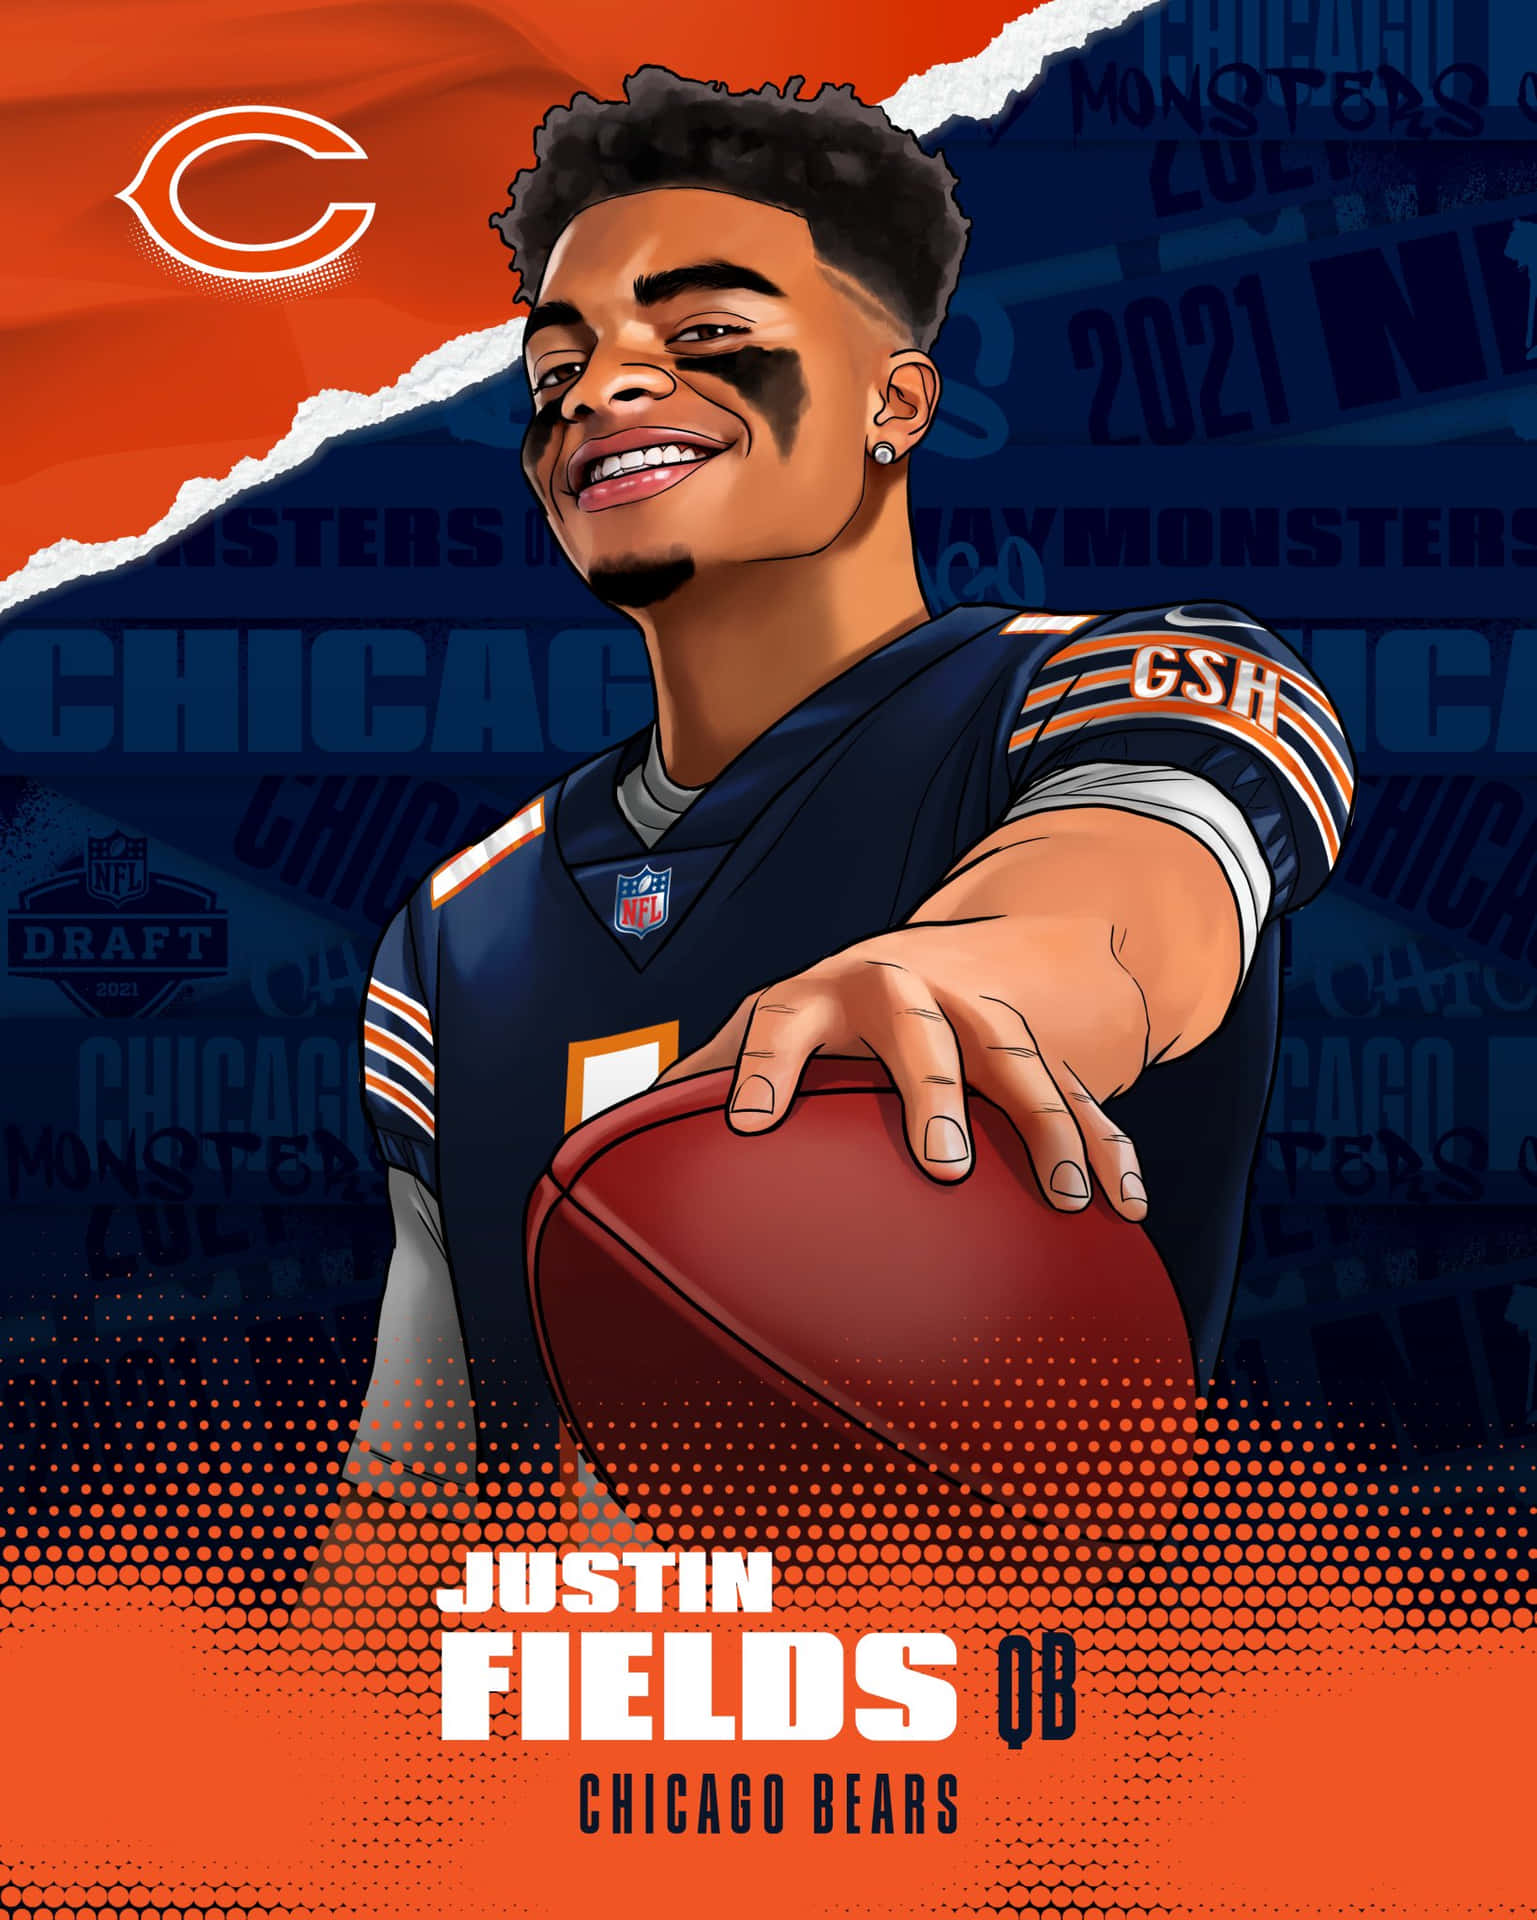 Background Justin Fields Wallpaper Discover more American Championship  Chicago Bears Football Justin Fi  Chicago bears wallpaper Justin fields  Chicago bears